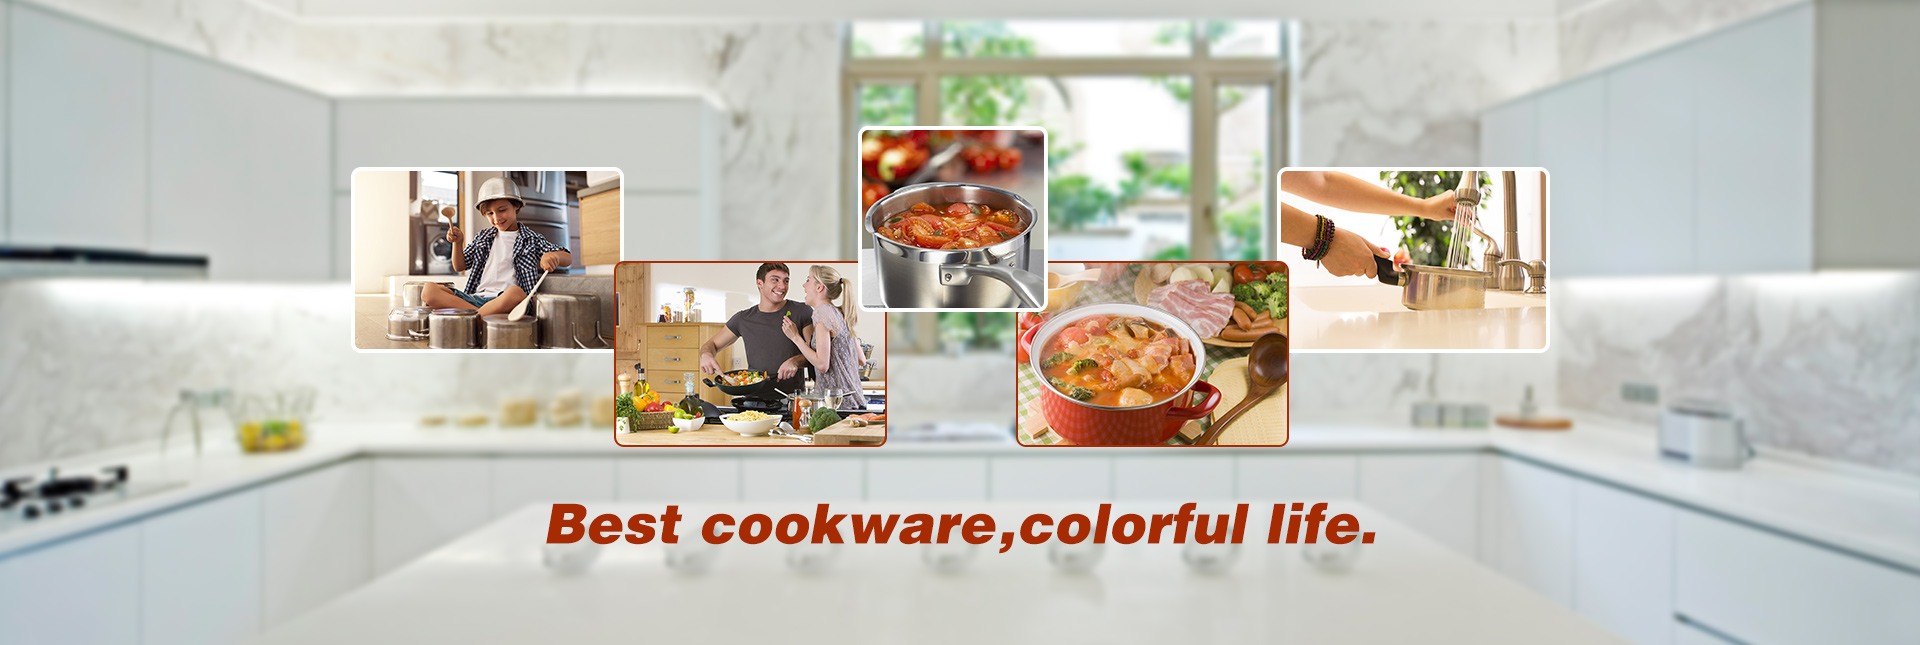 Best cookware,colorful life.